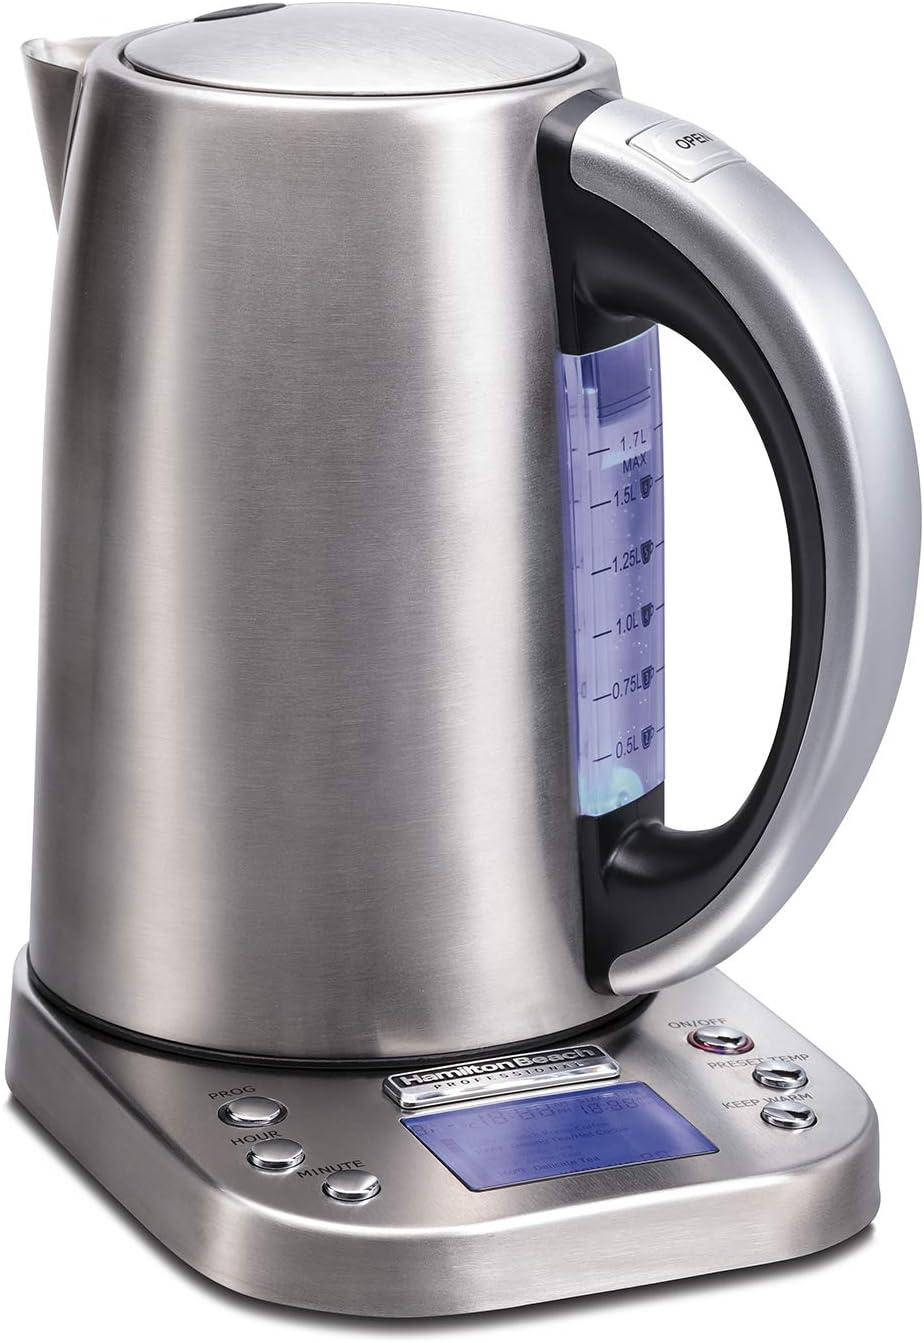 Hamilton Beach Professional Digital LCD Temperature Control Electric Tea Kettle, Water Boiler & Heater, 1.7 Liter, Fast Boiling 1500 Watts, Cordless, Auto-Shutoff & Boil-Dry Protection, Silver (41028)